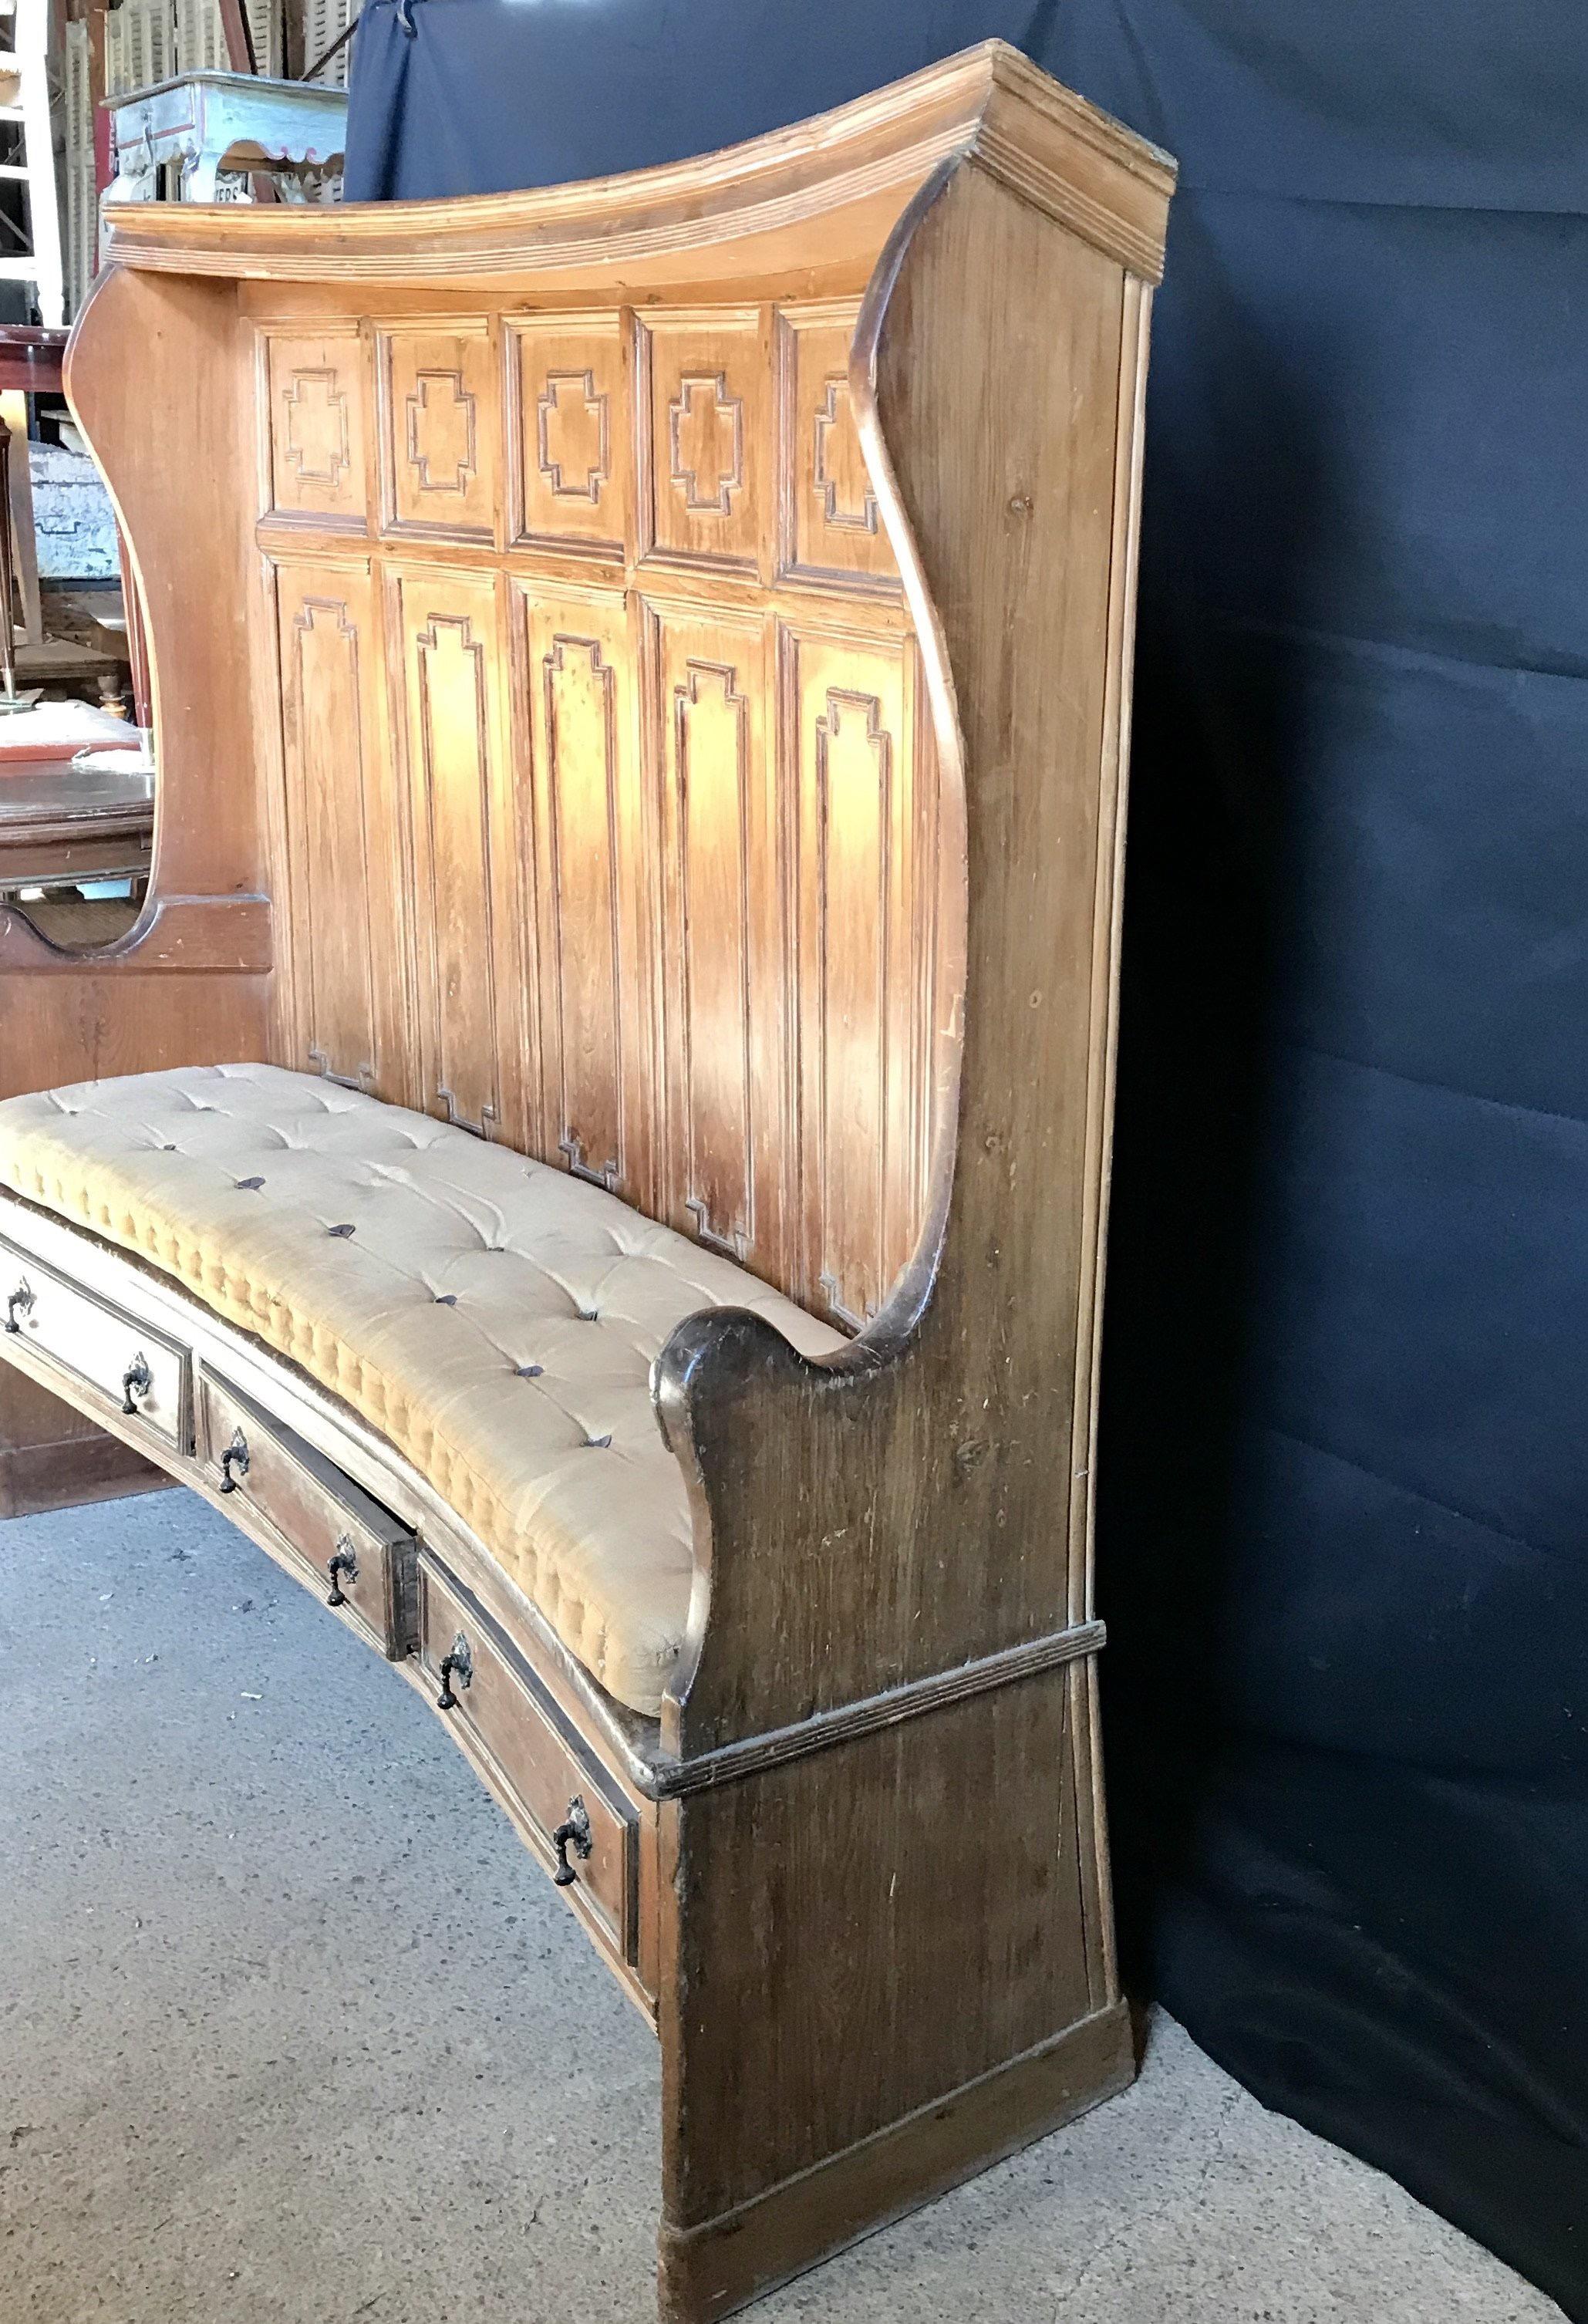 Very early British antique Georgian tavern settle with two sided paneling and original leather buttoned cushion. Perfect for a hall storage bench, this museum quality piece features a beautiful tall curved form, remarkable patina, three storage